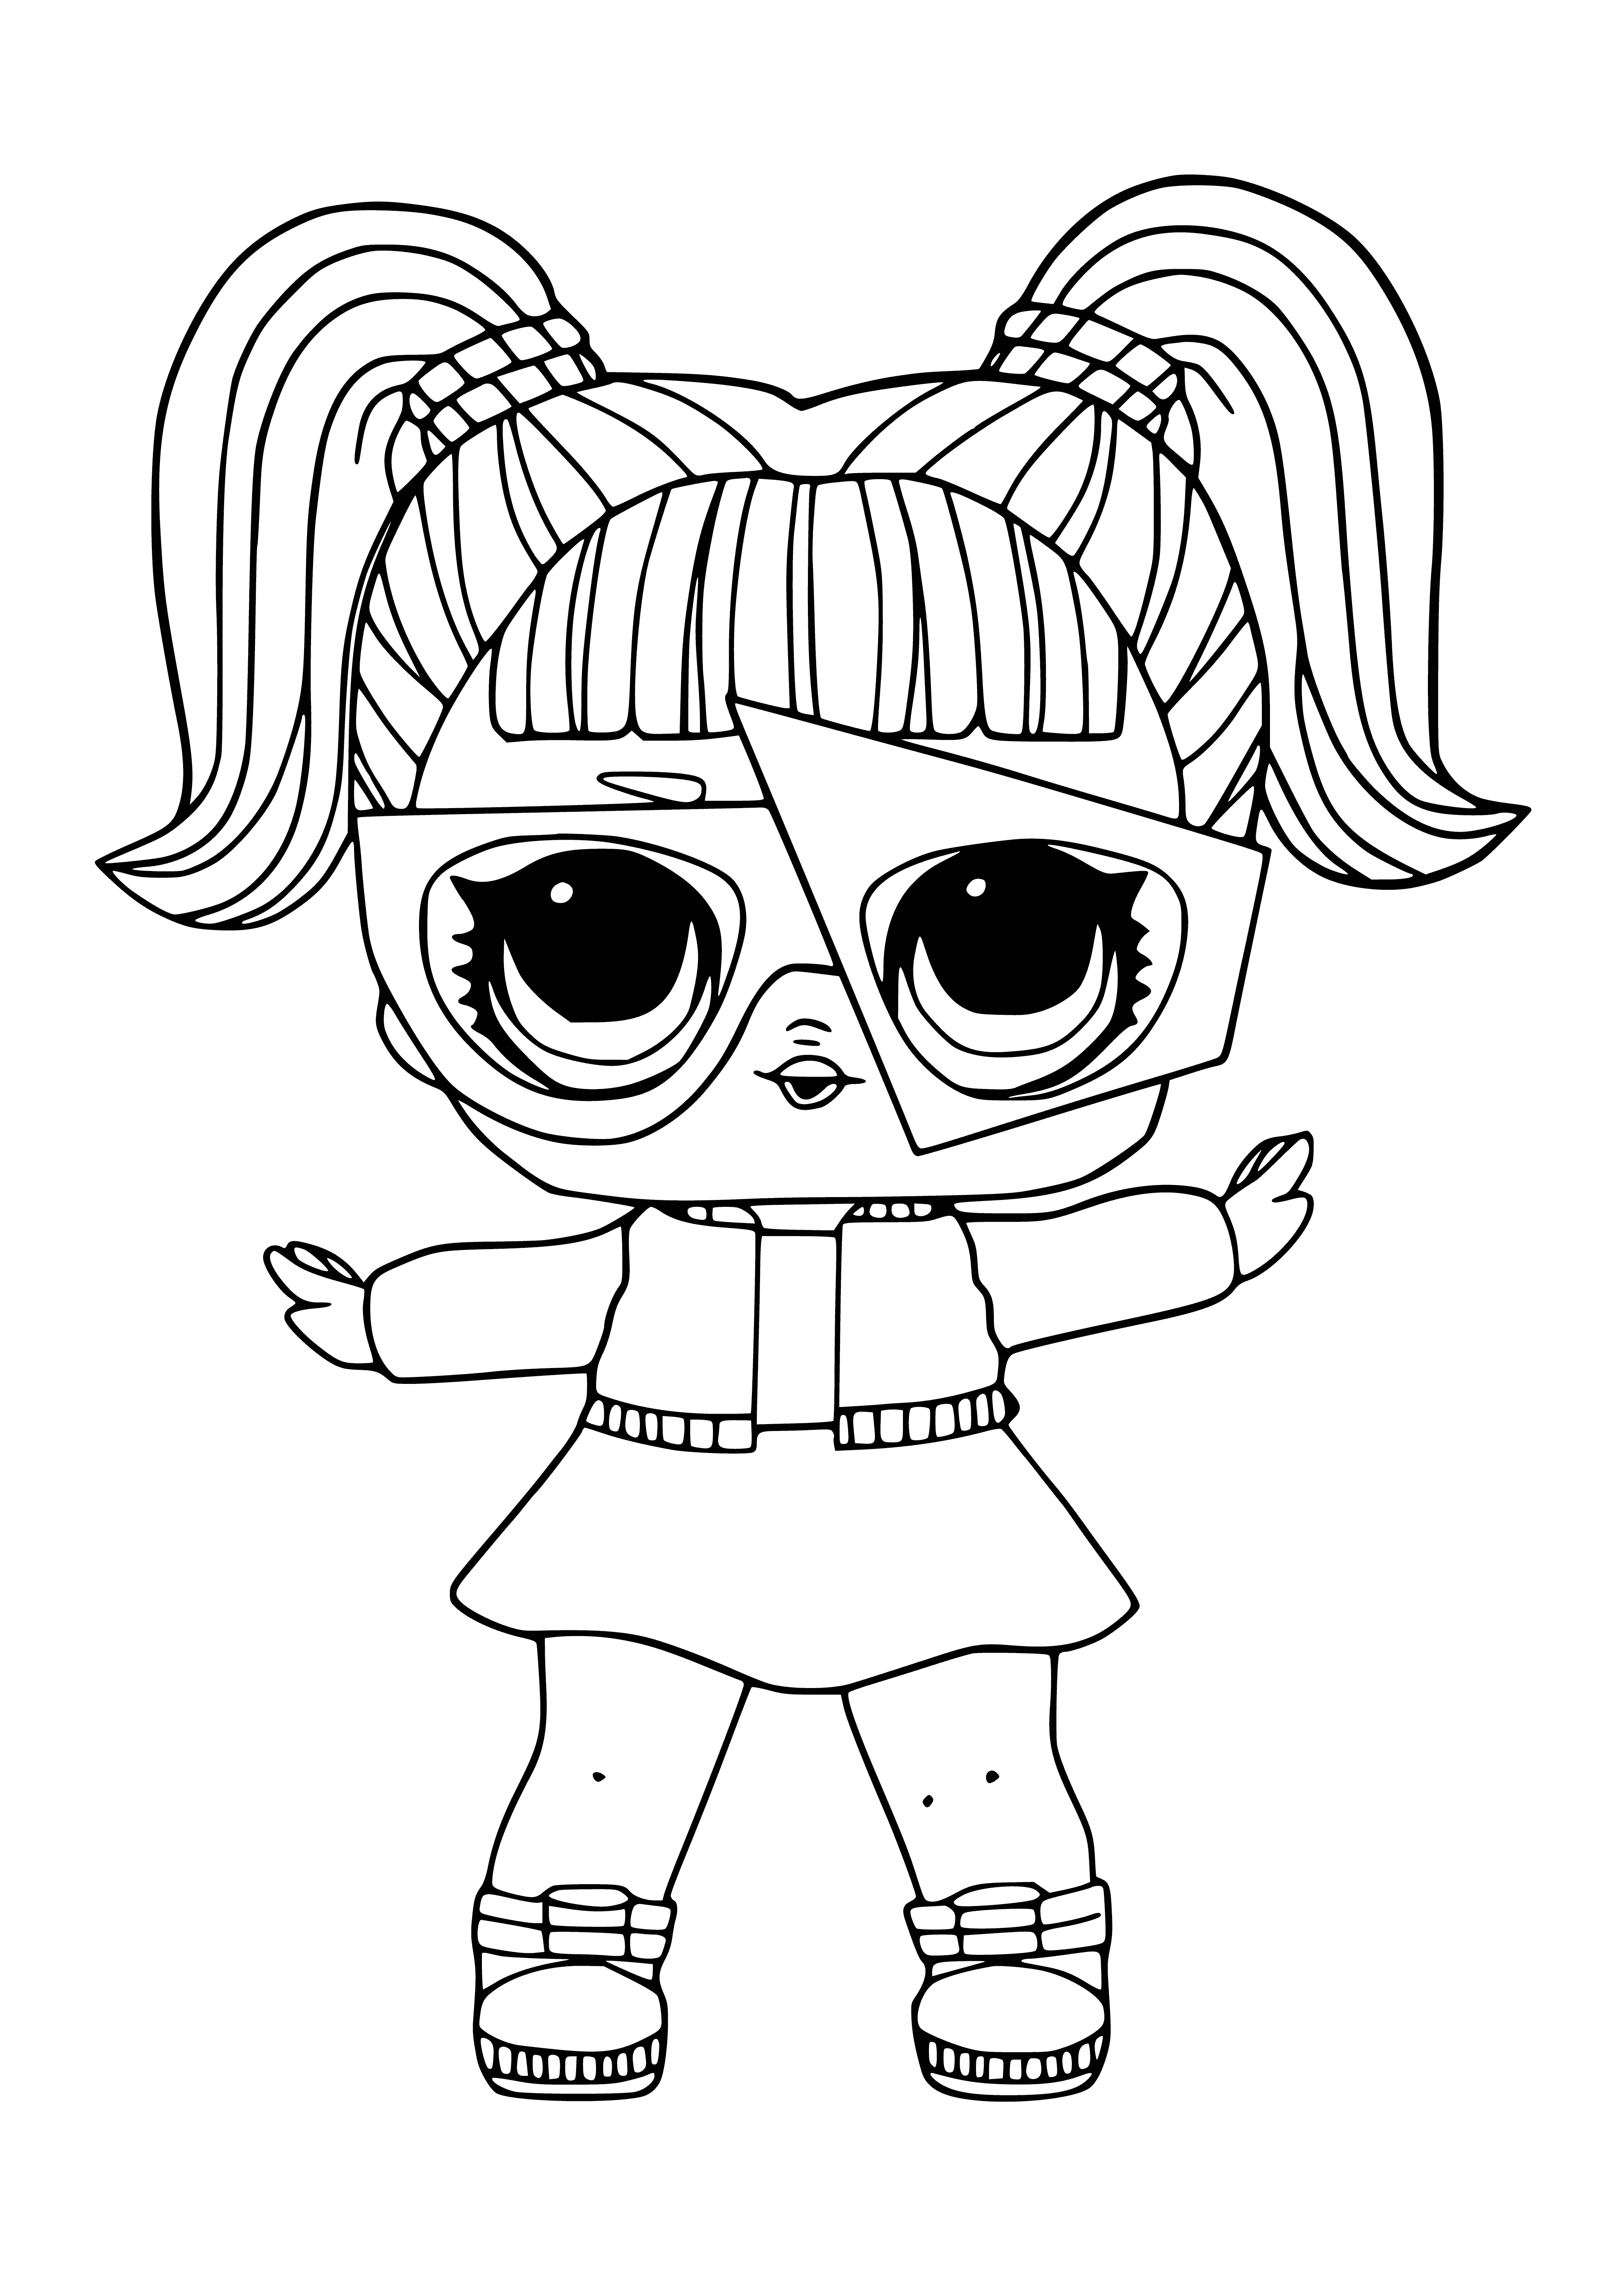 coloring page: Coloring page of plastic L.O.L - LOL Glamstronaut toy in silver/white outfit and blue/white helmet, holding white flag.